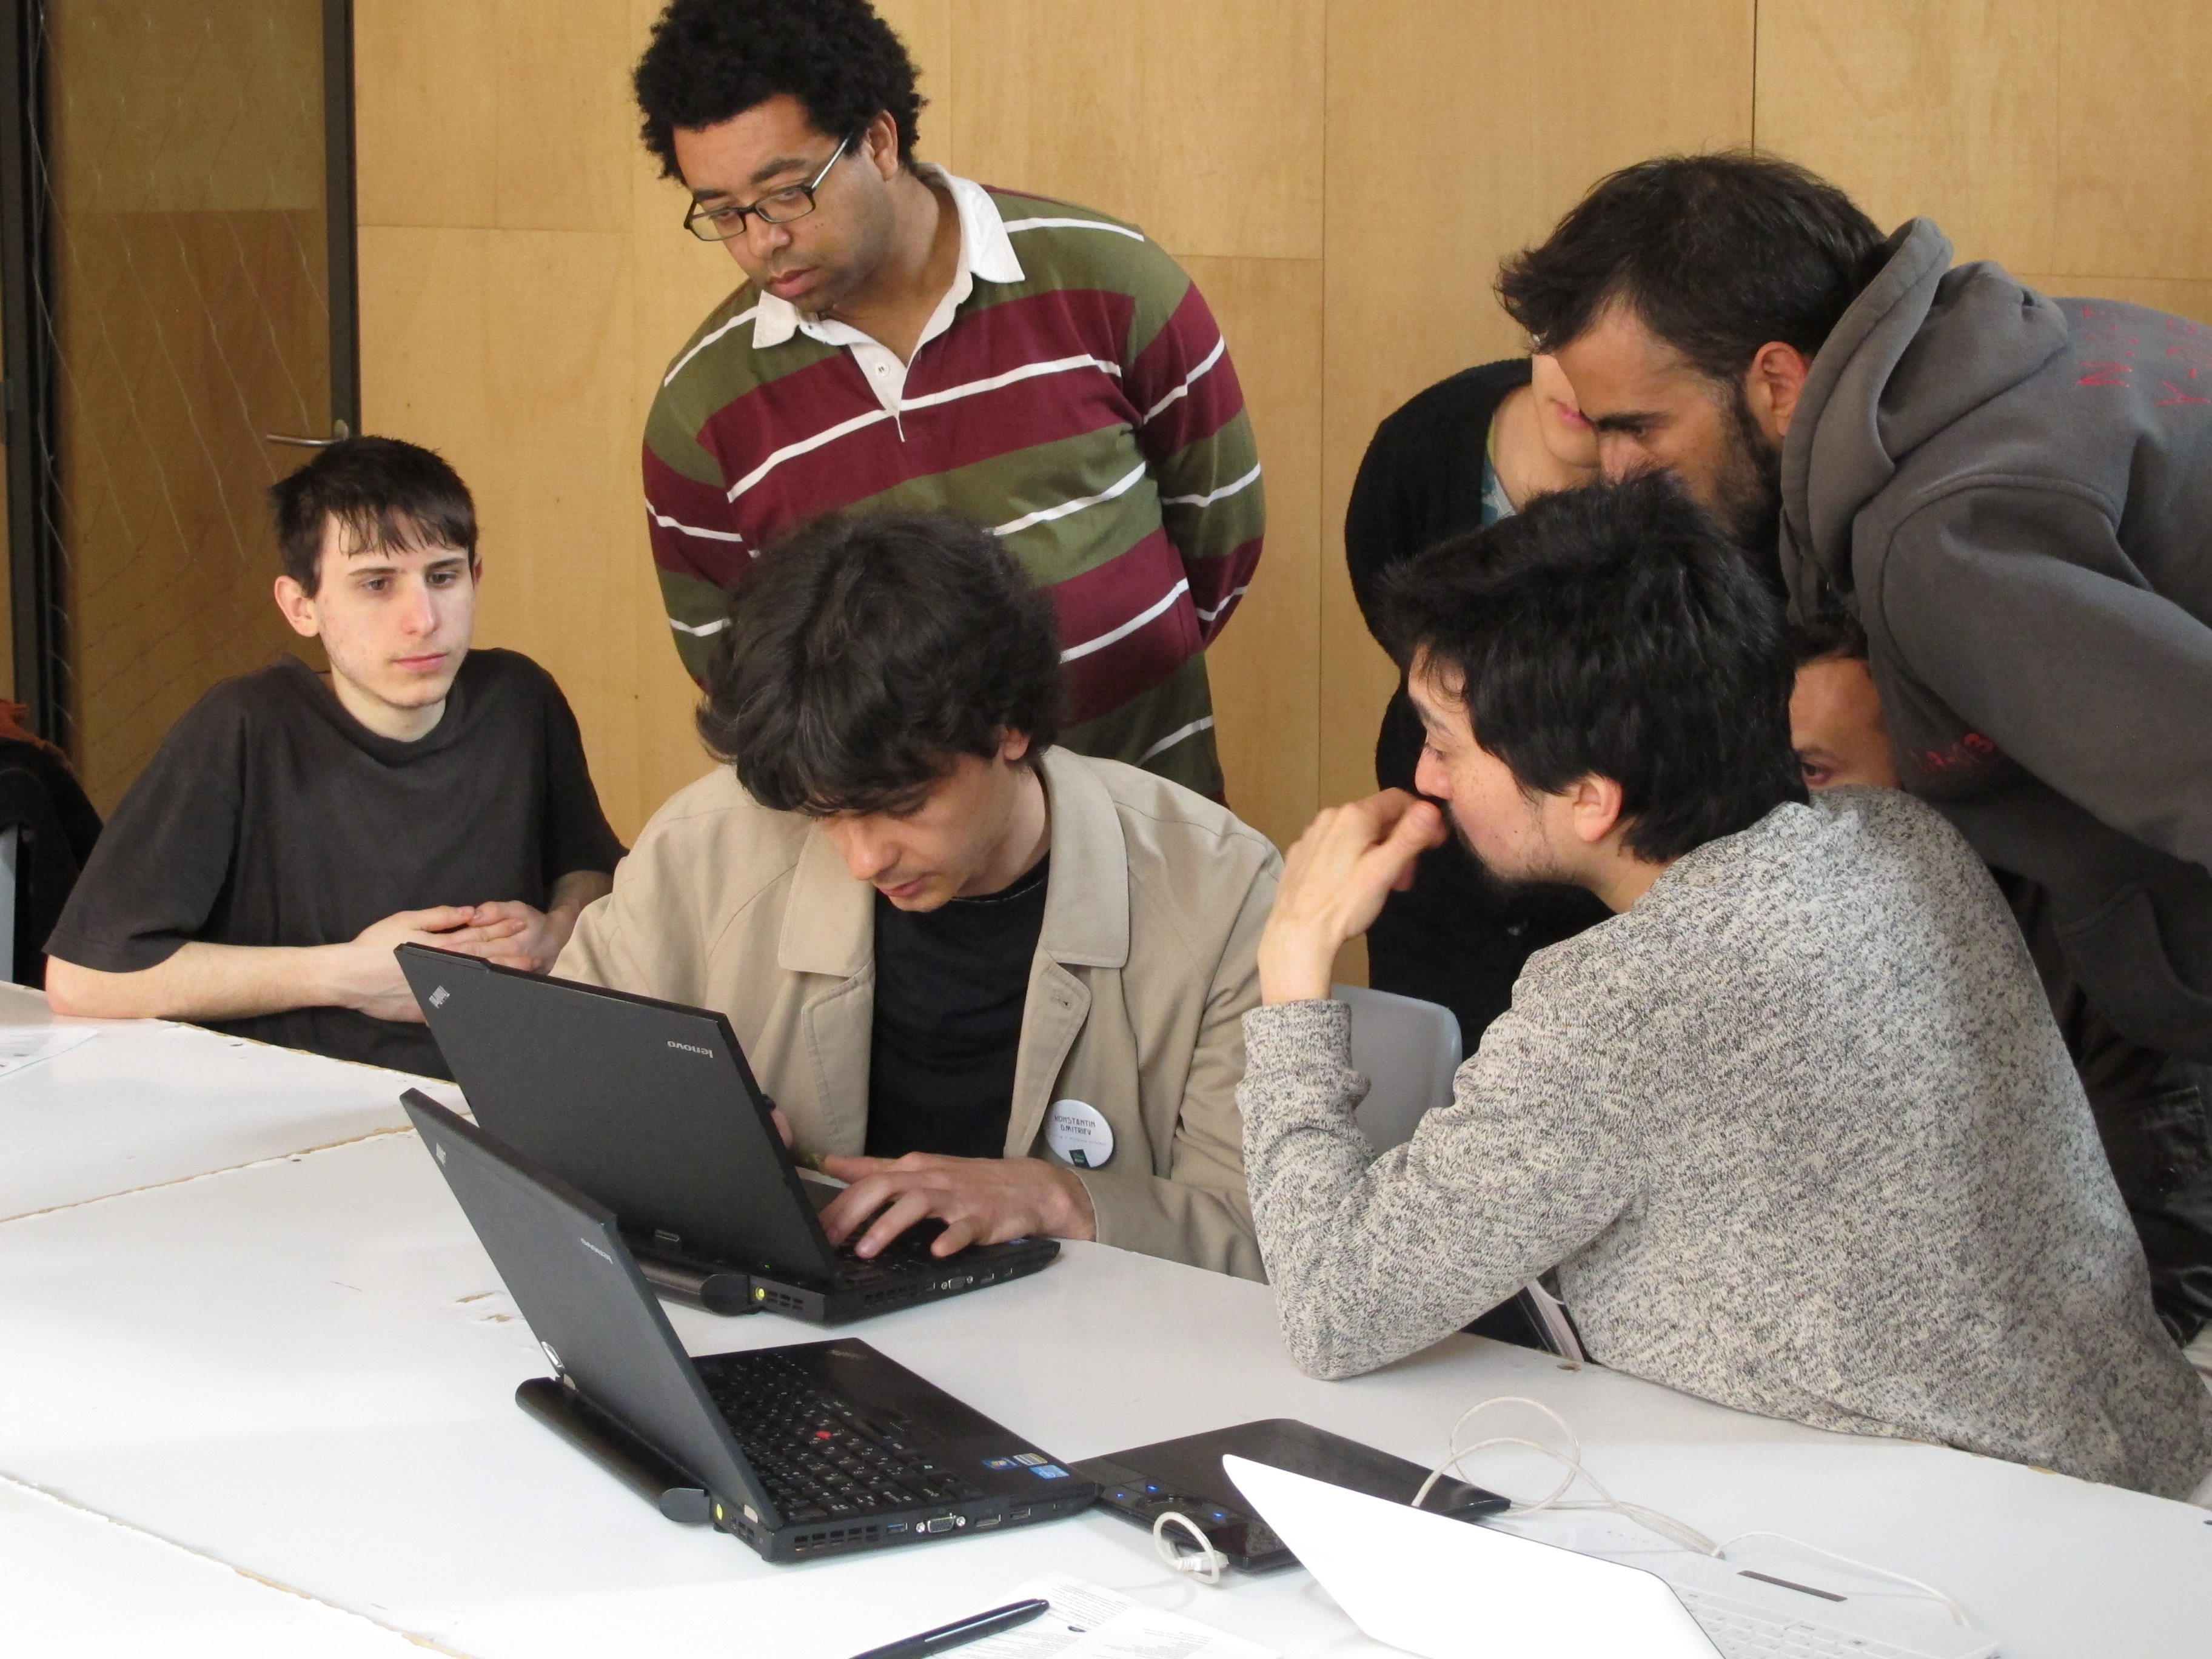 Demonstrating MorevnaProject's workflow. Photo by Peter Westenberg